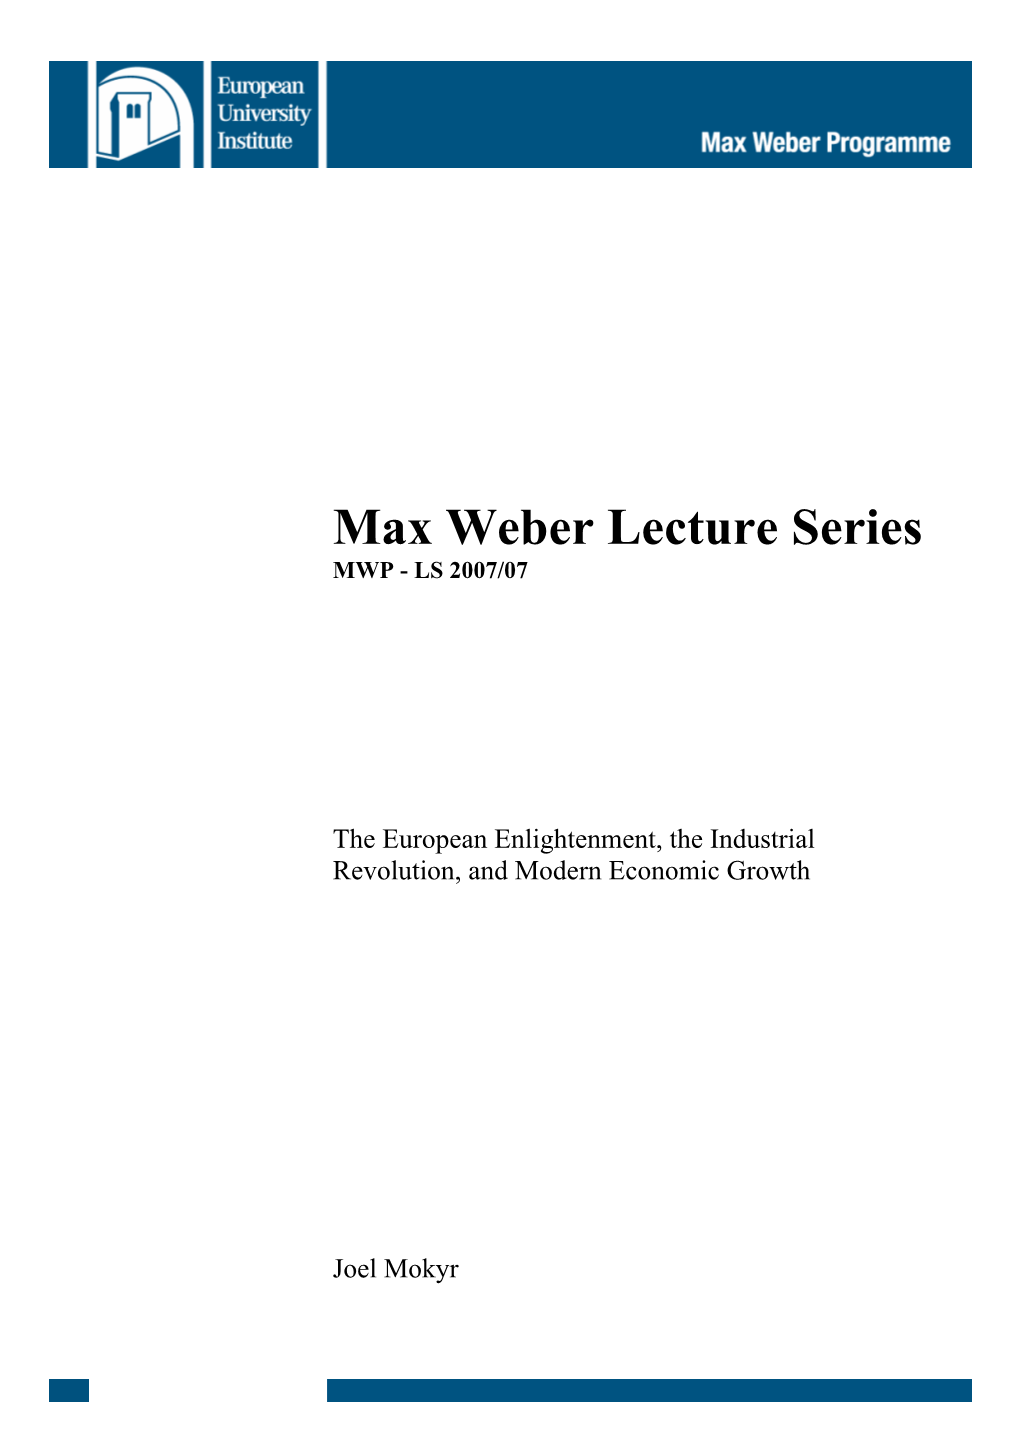 European Enlightenment, the Industrial Revolution, and Modern Economic Growth